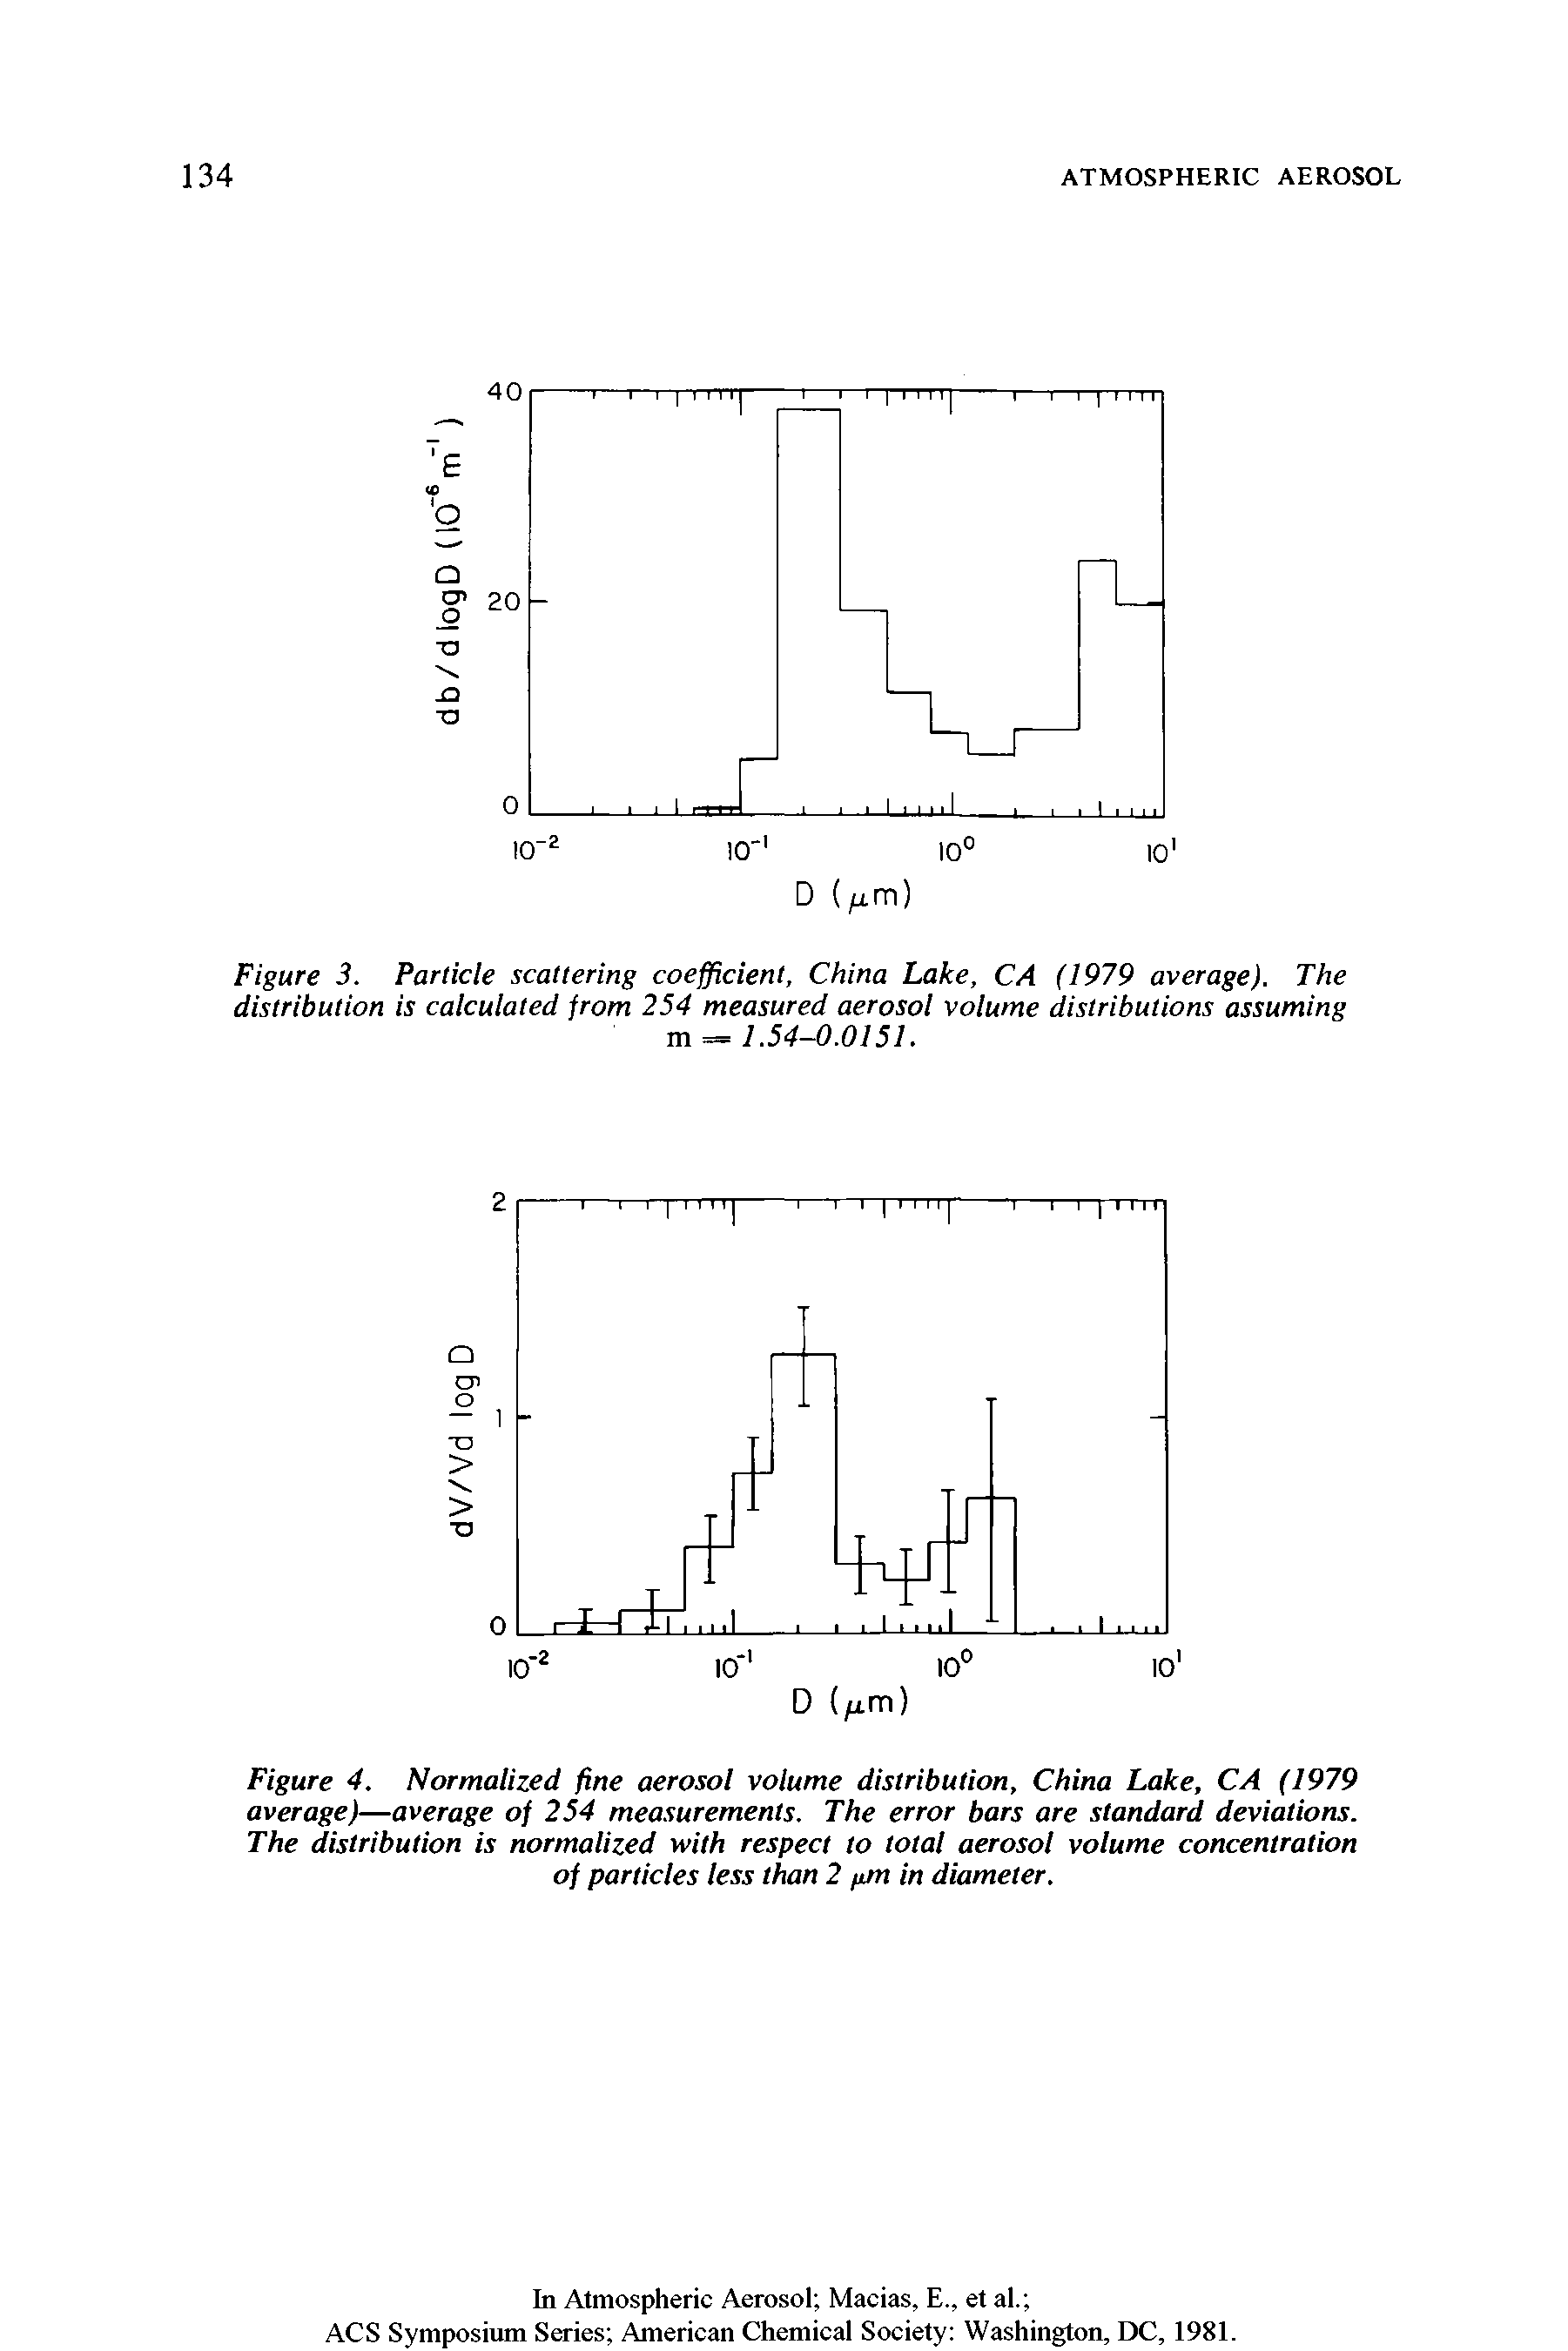 Figure 3. Particle scattering coefficient, China Lake, CA (1979 average). The distribution is calculated from 254 measured aerosol volume distributions assuming...